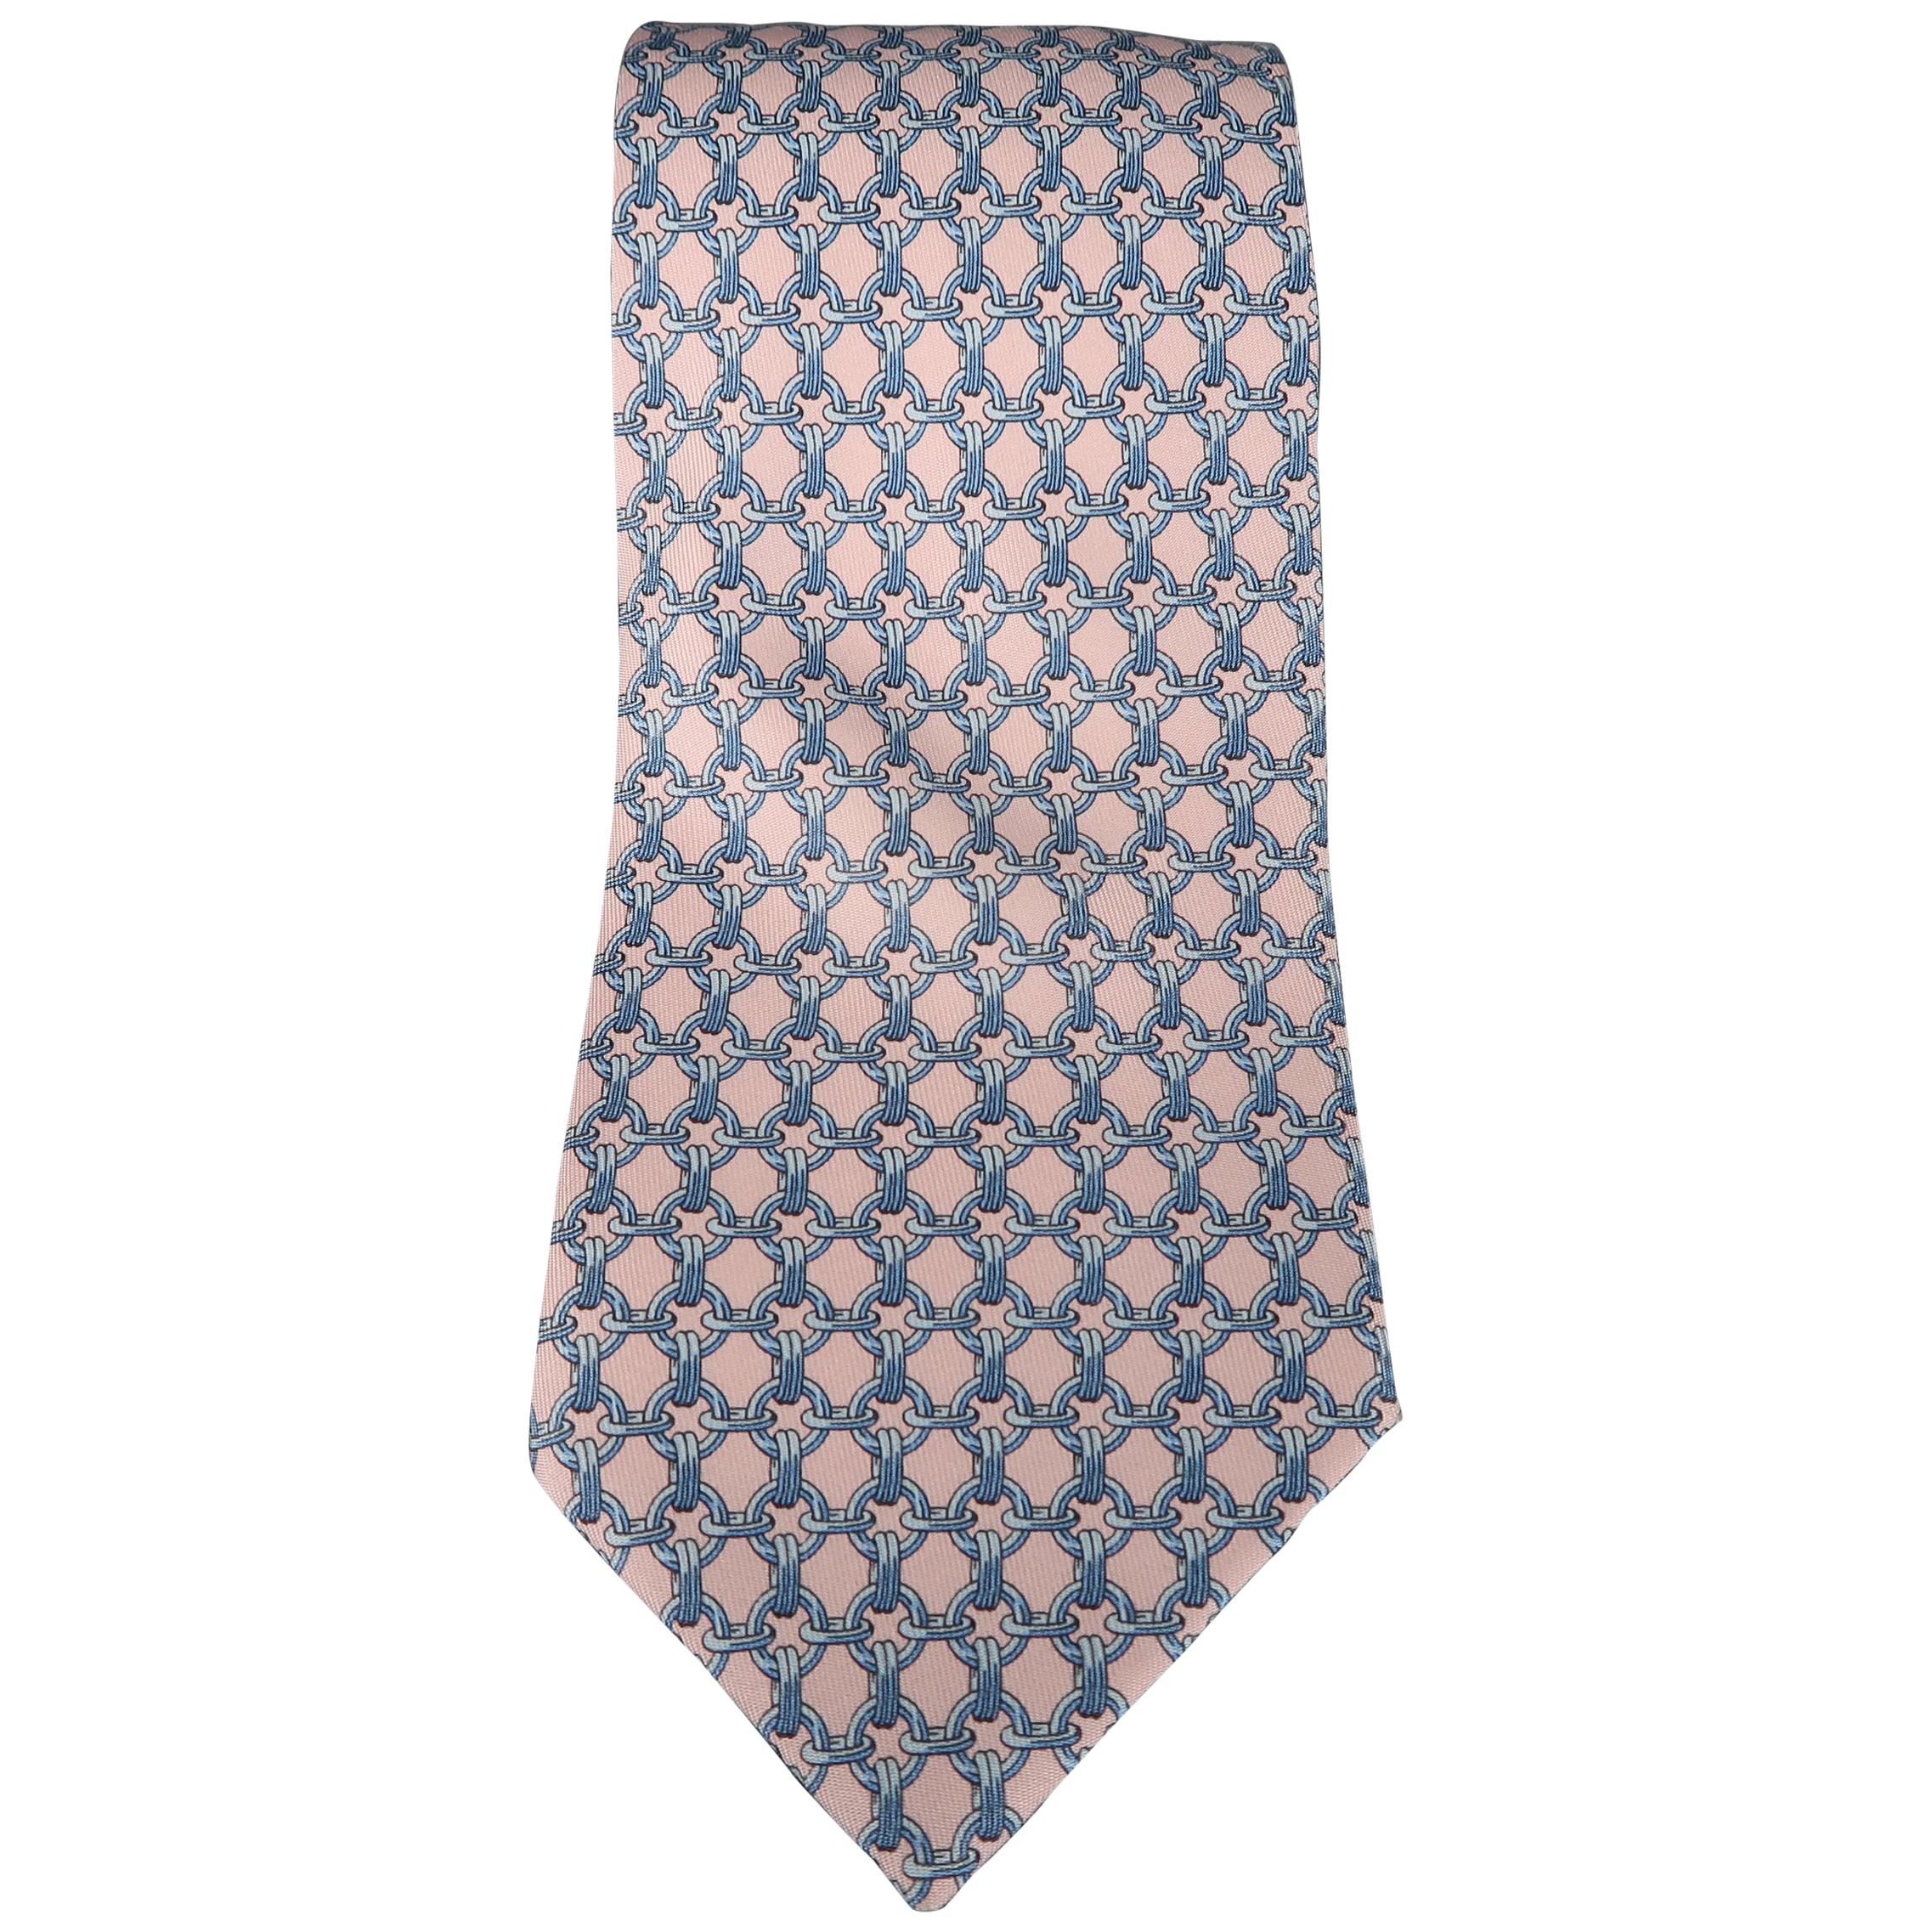 HERMES Pink & Blue Chain Print Silk Tie with Box